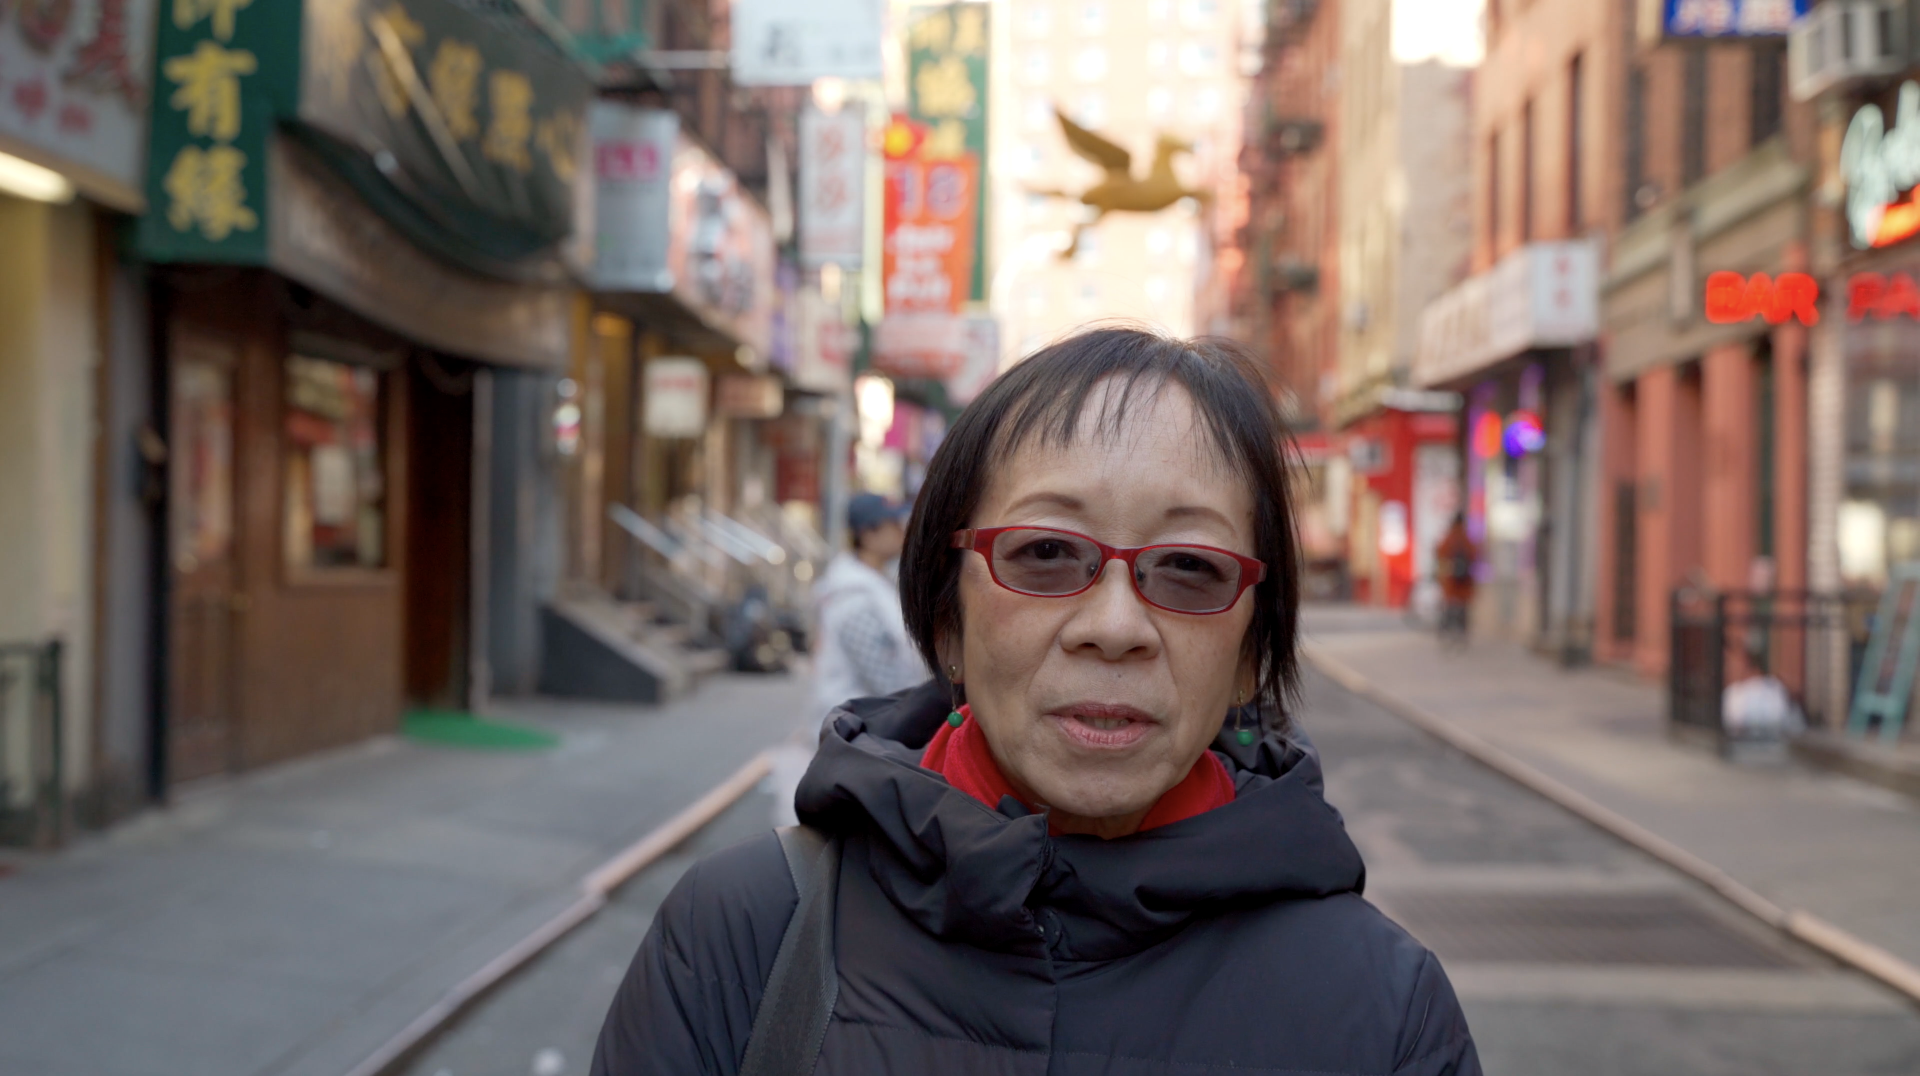 An asian woman with short hair standing on a Chinatown street.